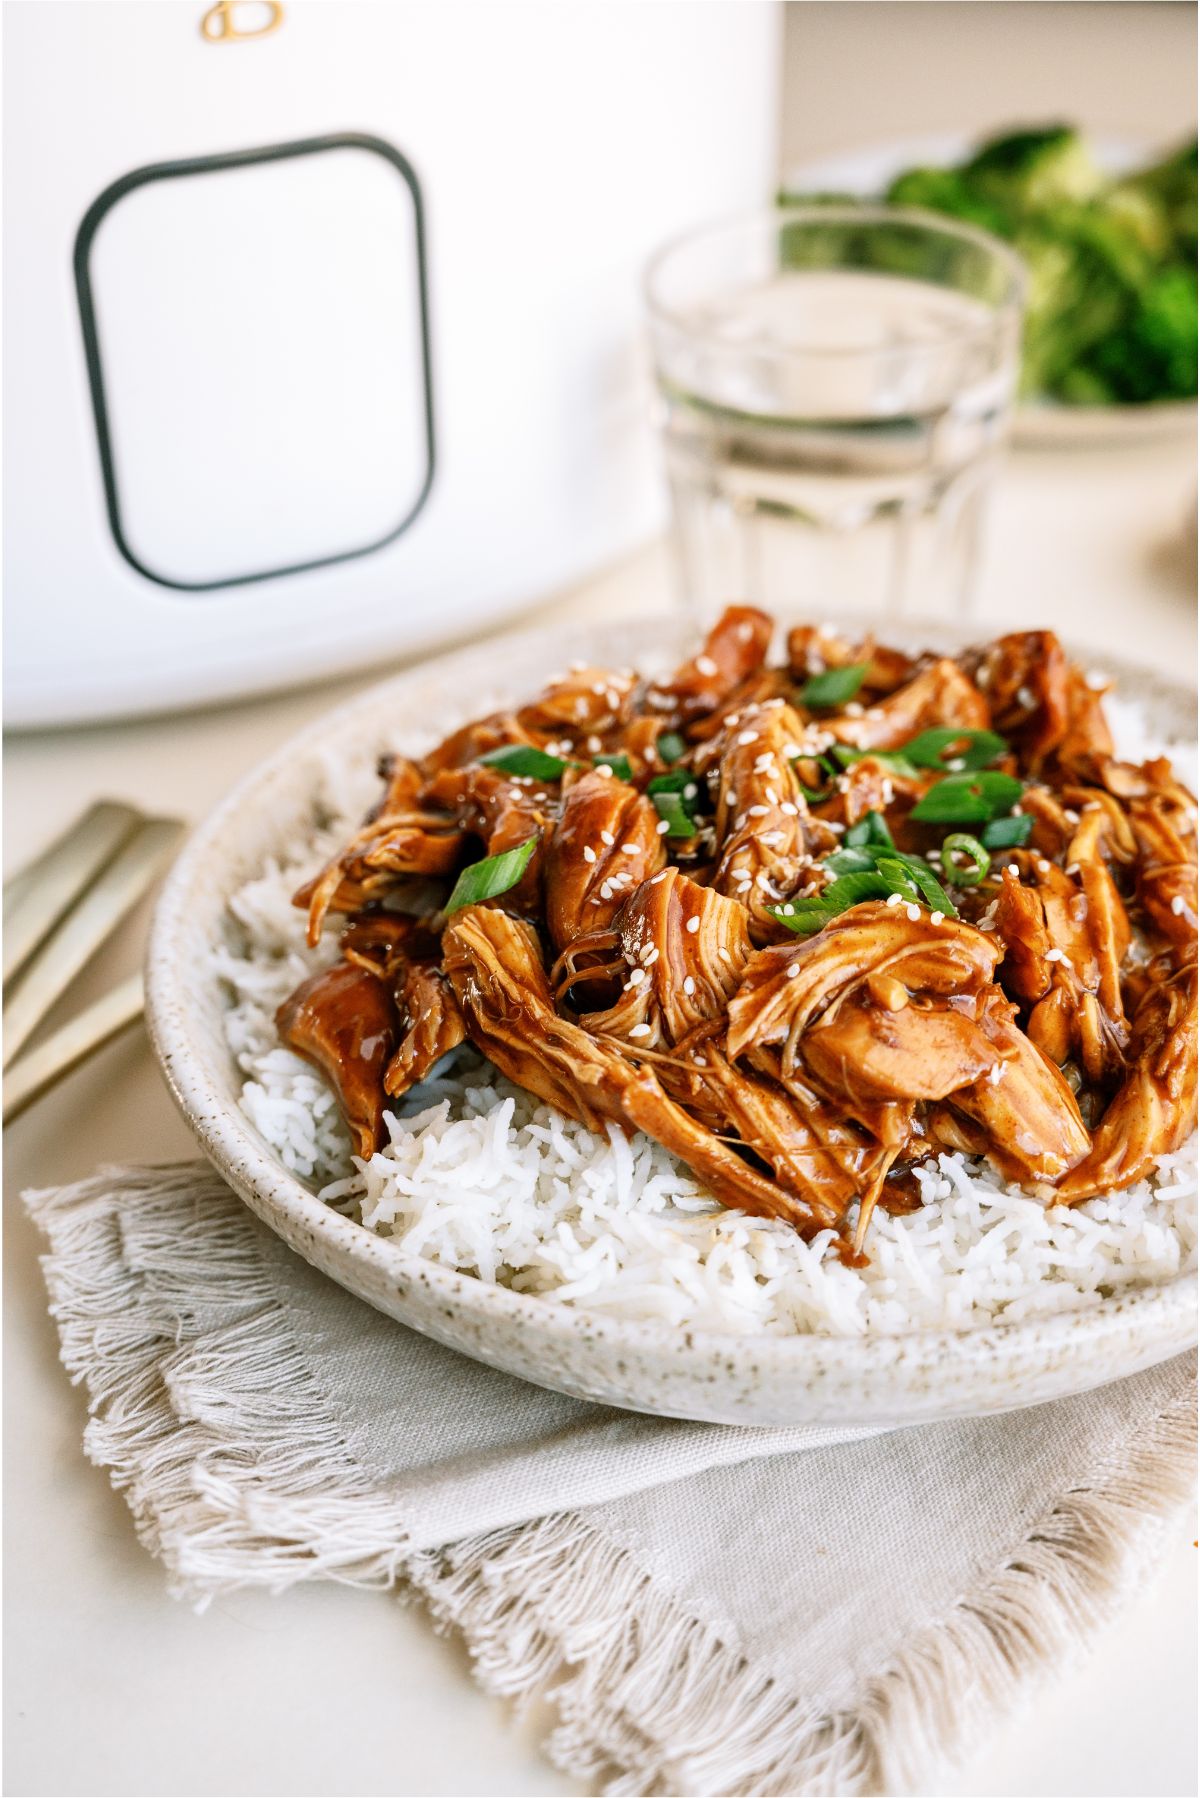 A plate of Slow Cooker Asian Glazed Chicken over rice with a slow cooker in the back ground